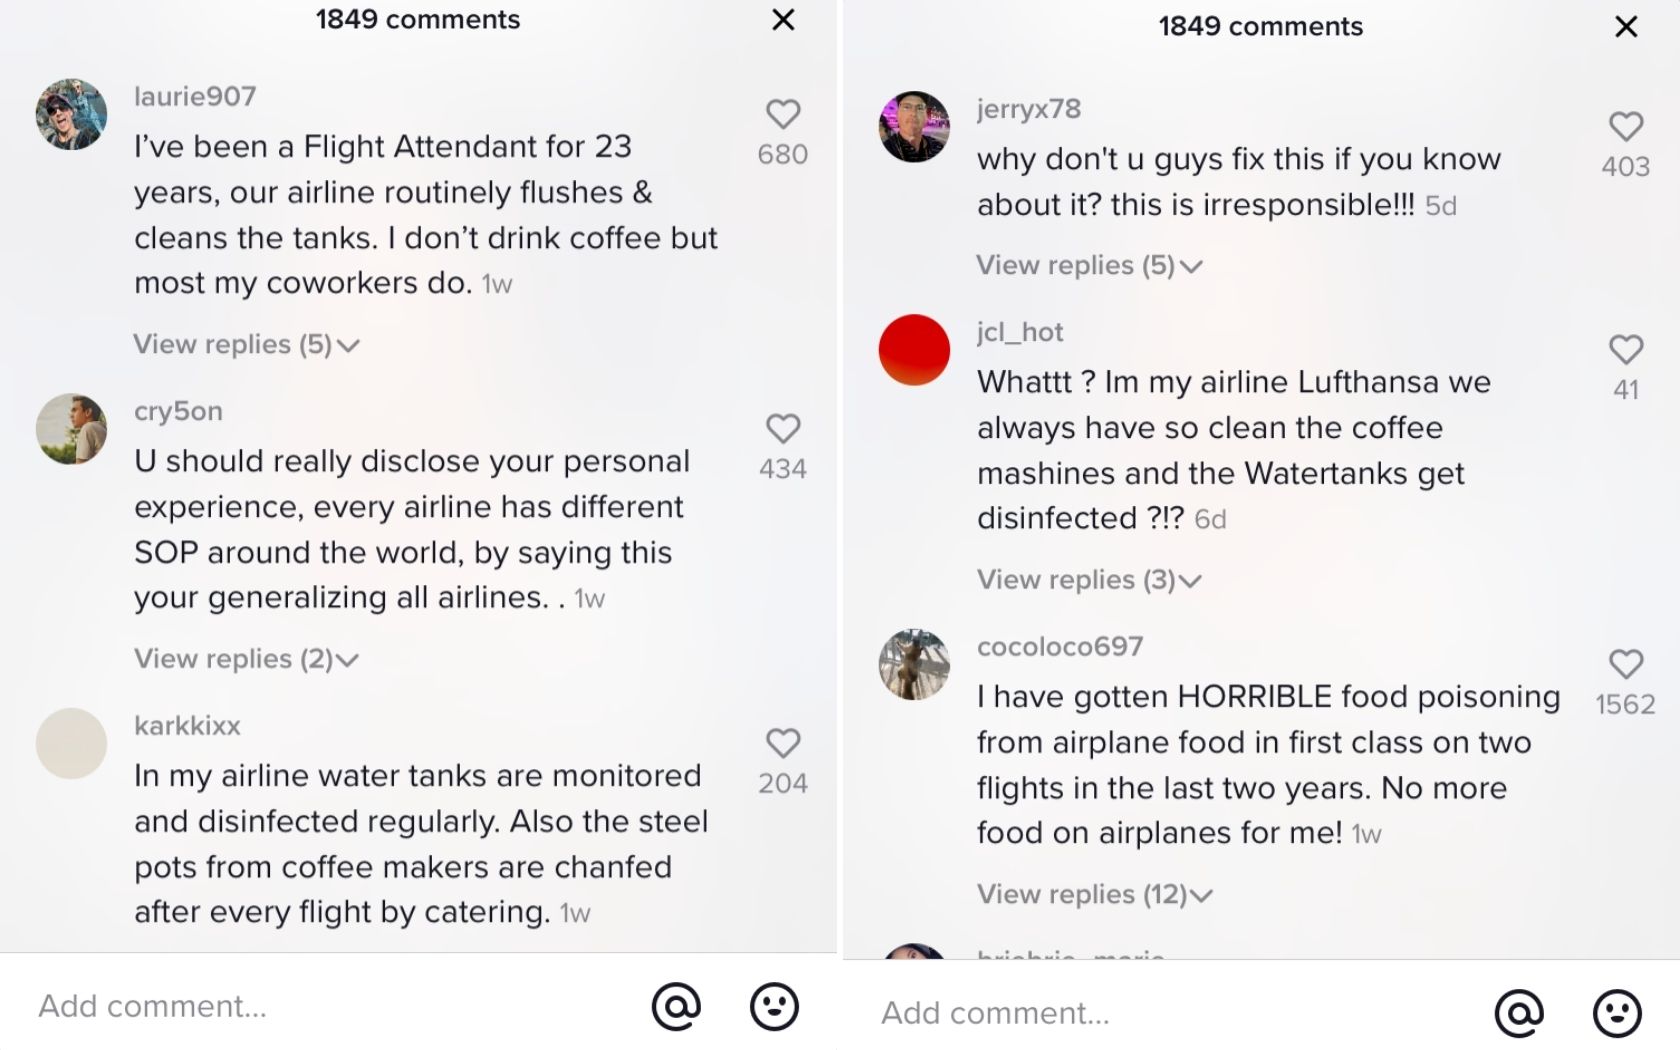 Comments on TikTok about why you shouldn't drink coffee or tea on flights